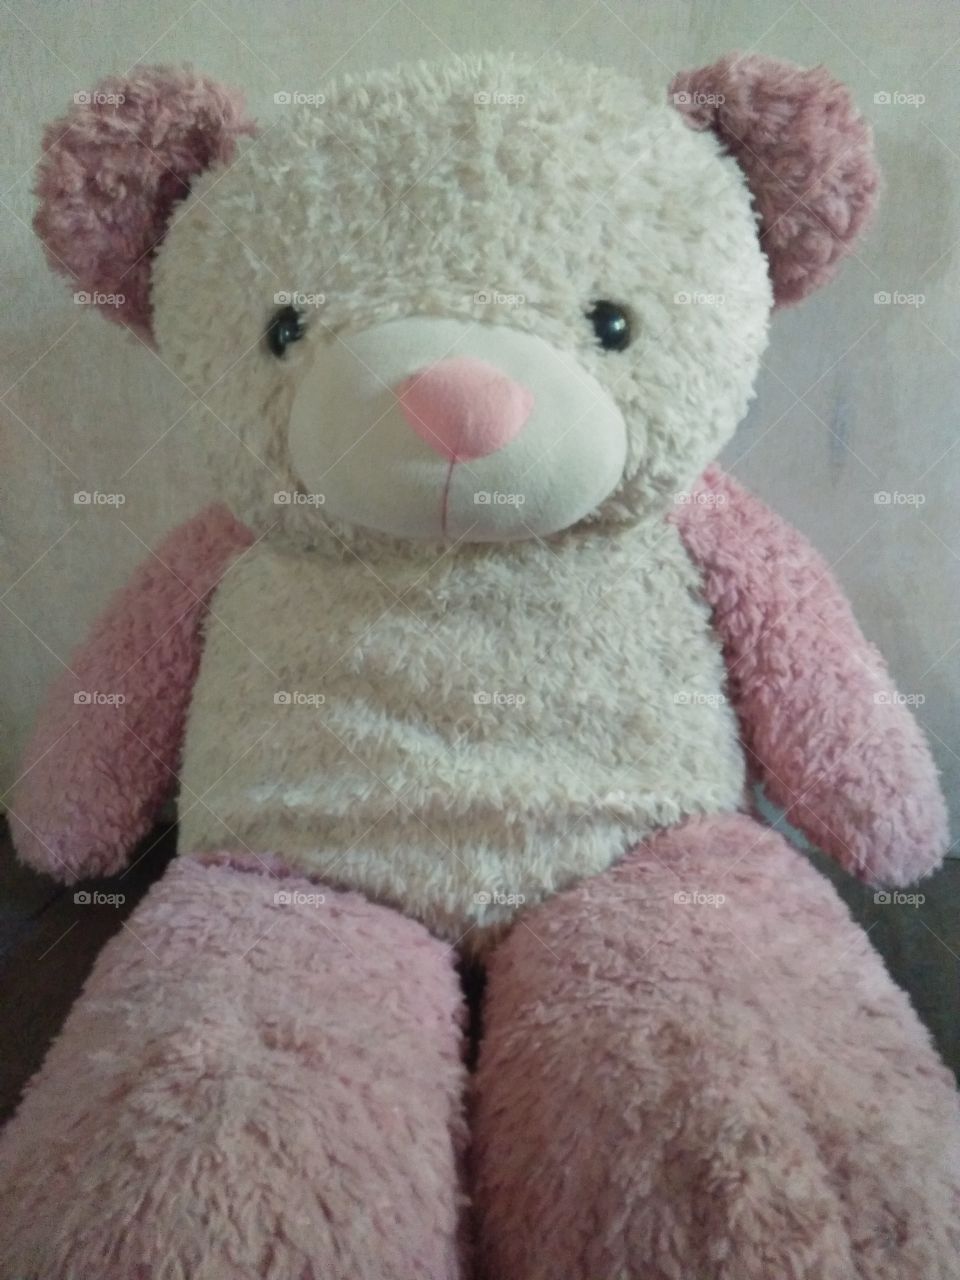 This is pink the old teddy of my second daughter Apple .She is a little bit sad and a little filthy.